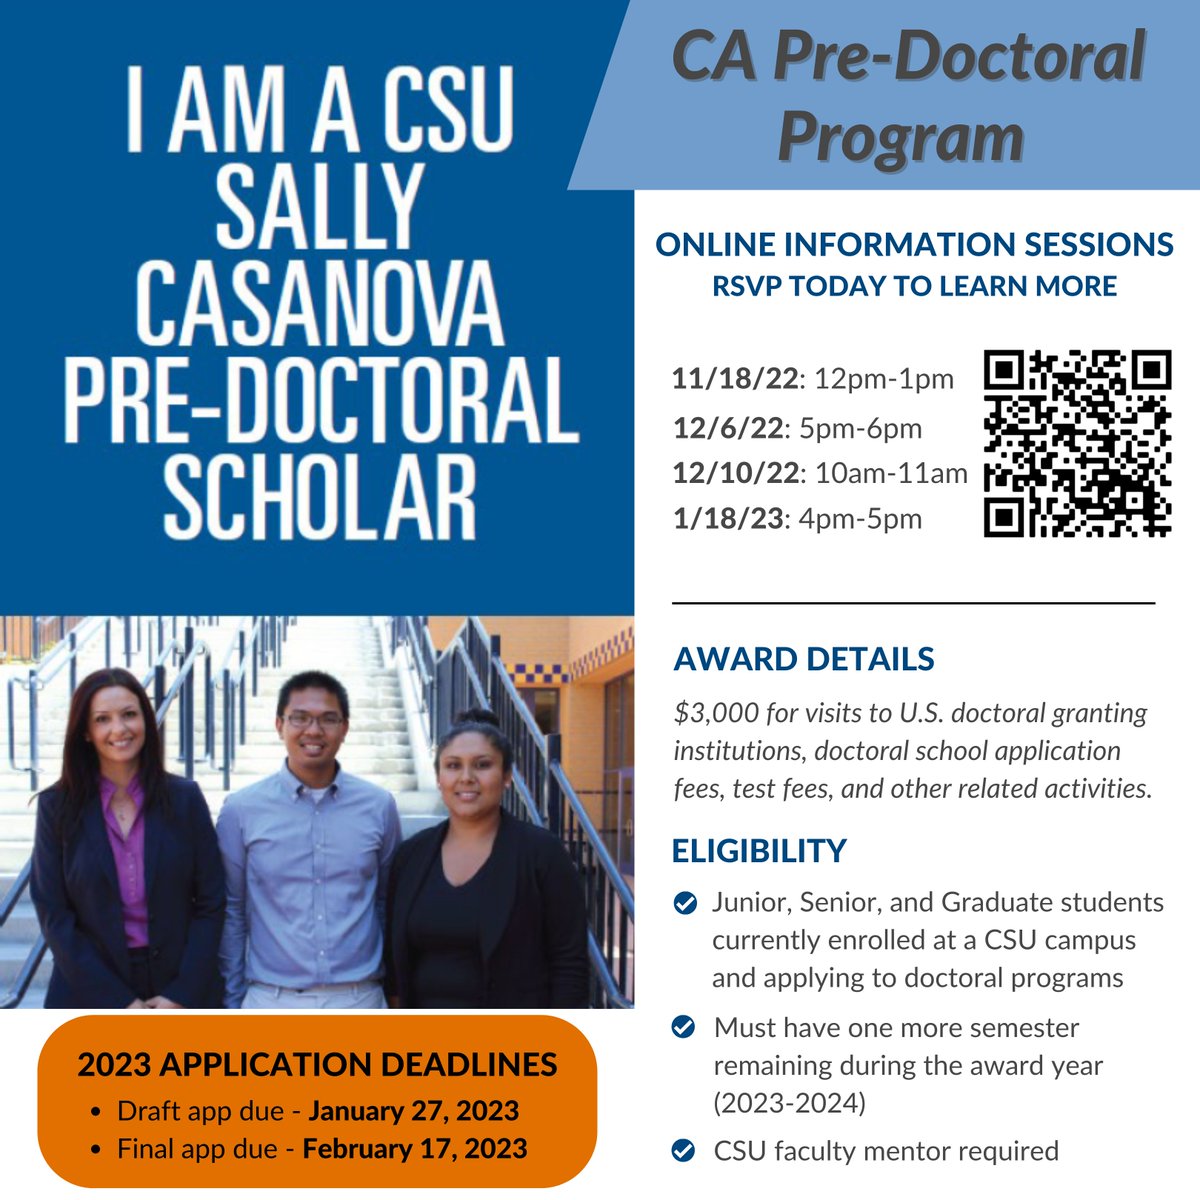 Students interested in becoming a Sally Casanova Pre-Doctoral Scholar are welcome to attend a virtual workshop before the Jan. 2023 application deadline. The next one is Tues. Dec. 6, 5-6 PM. Go to website for more info: bit.ly/3AVdsxm